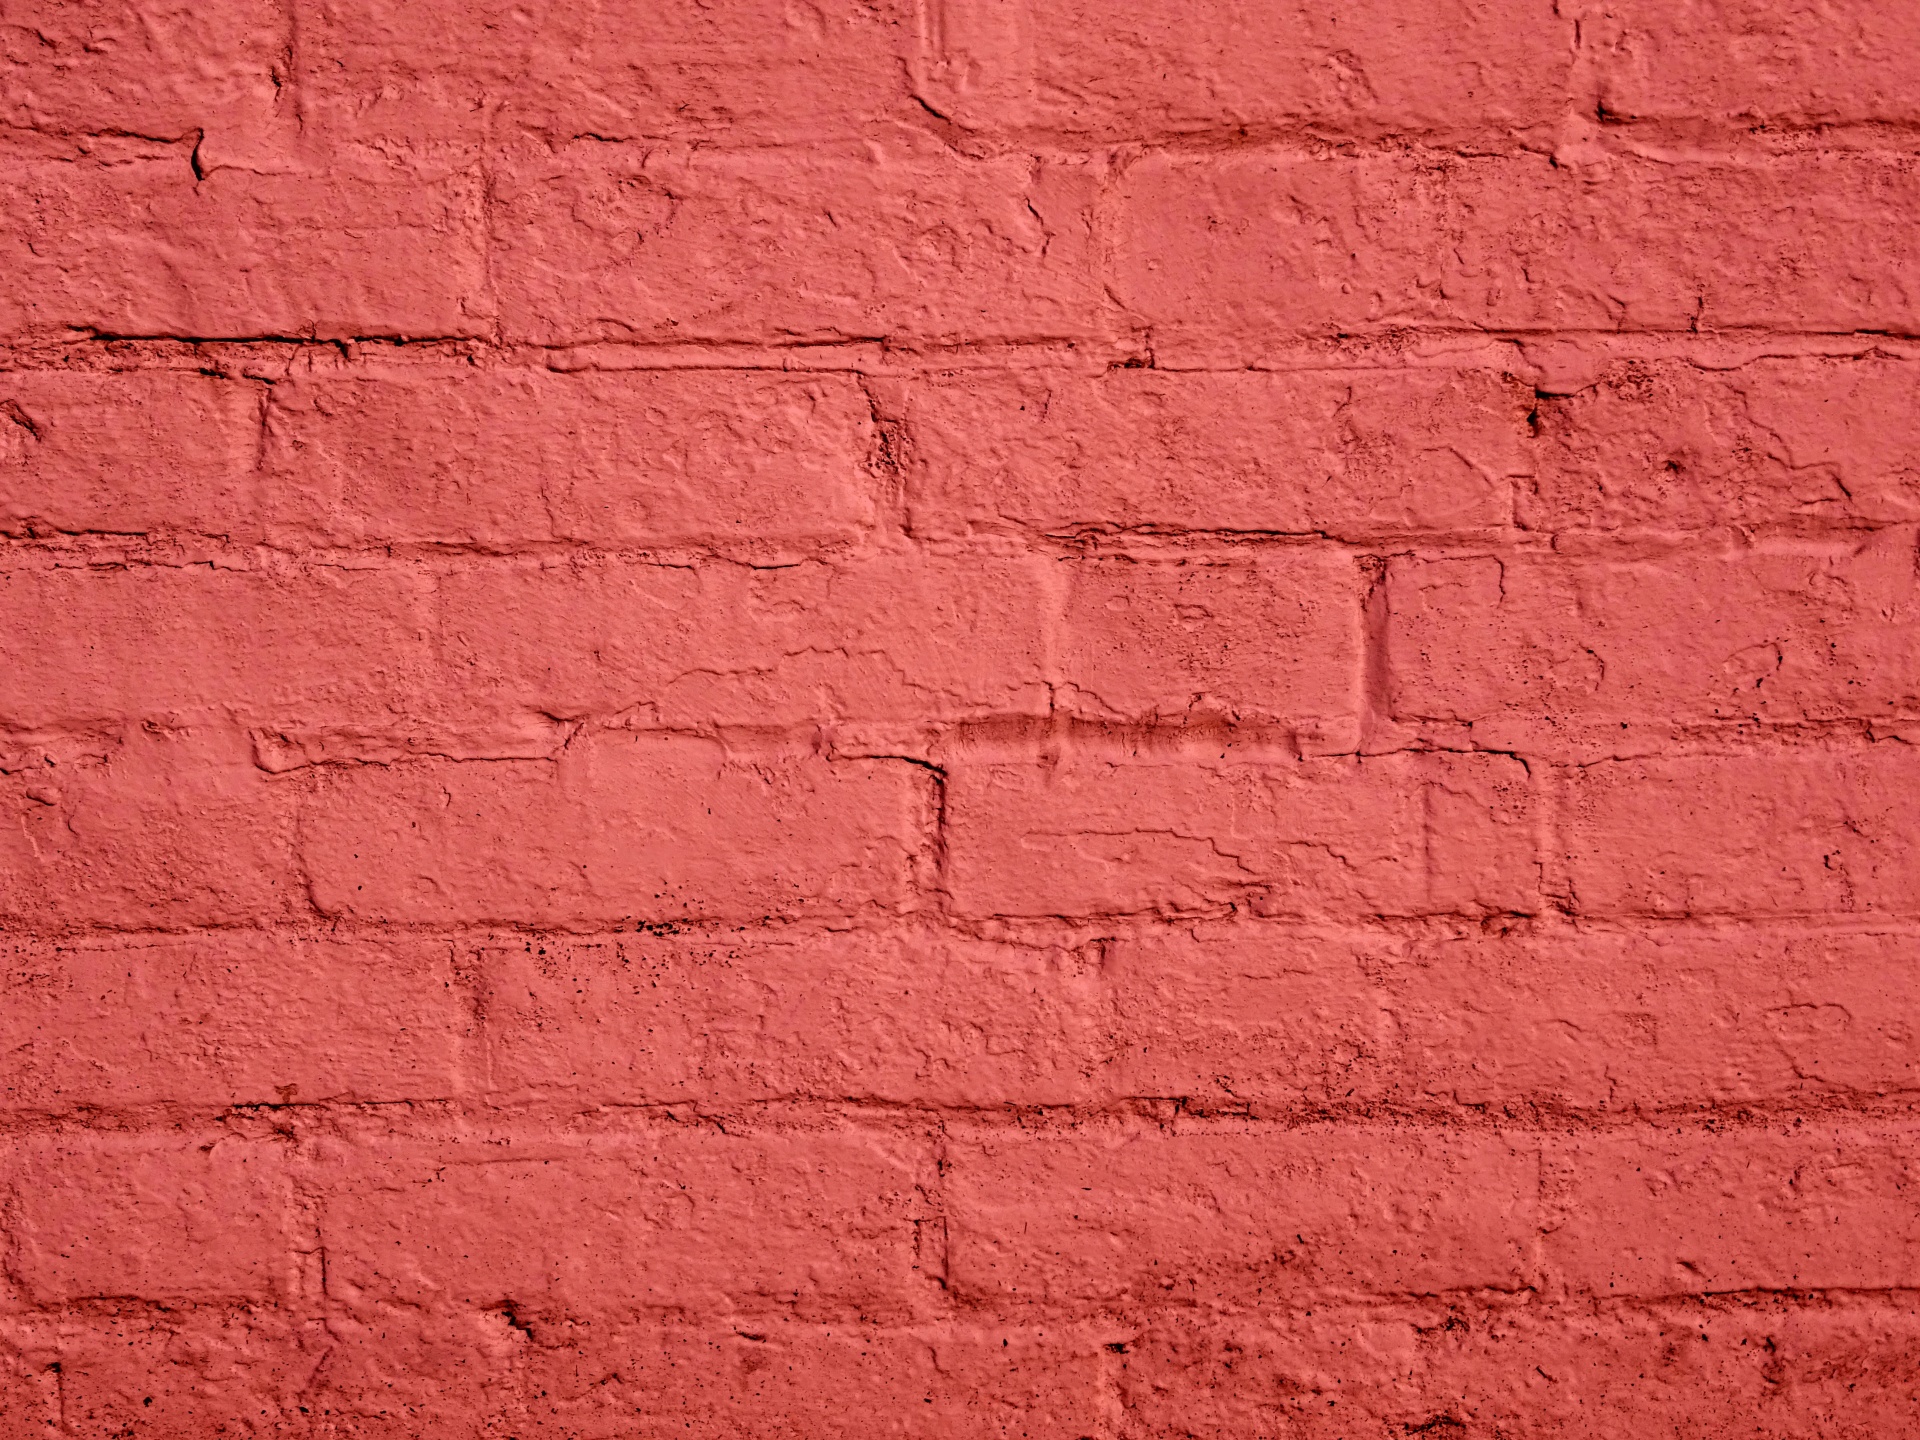 Saturated Red Wall